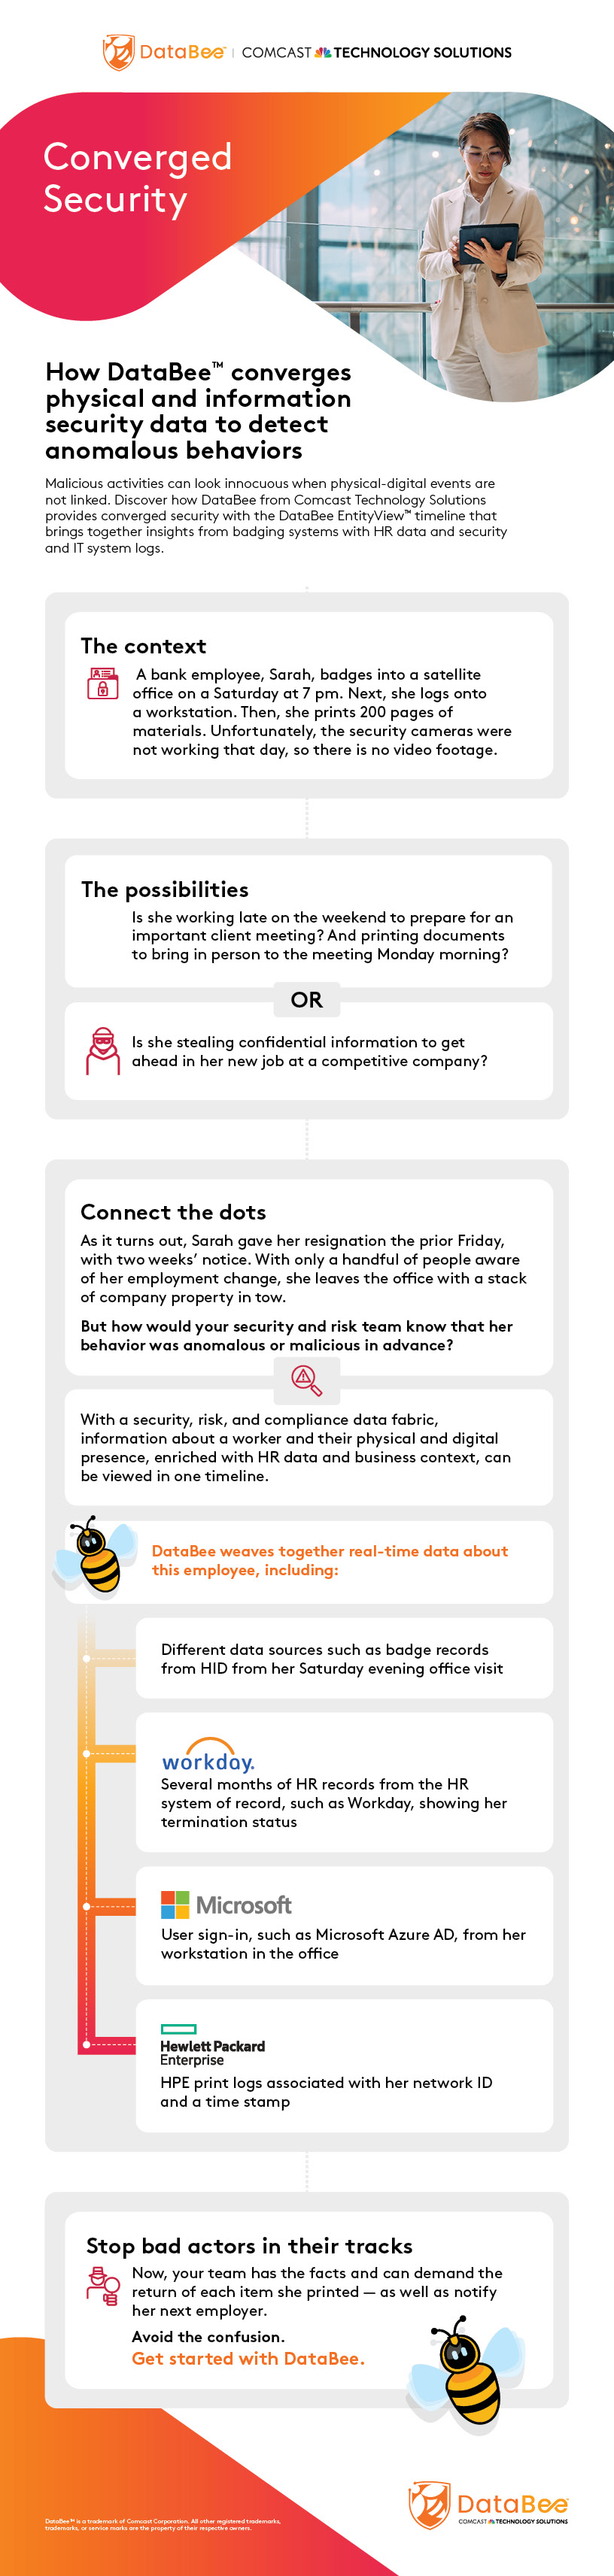 DataBee Converged Security Infographic